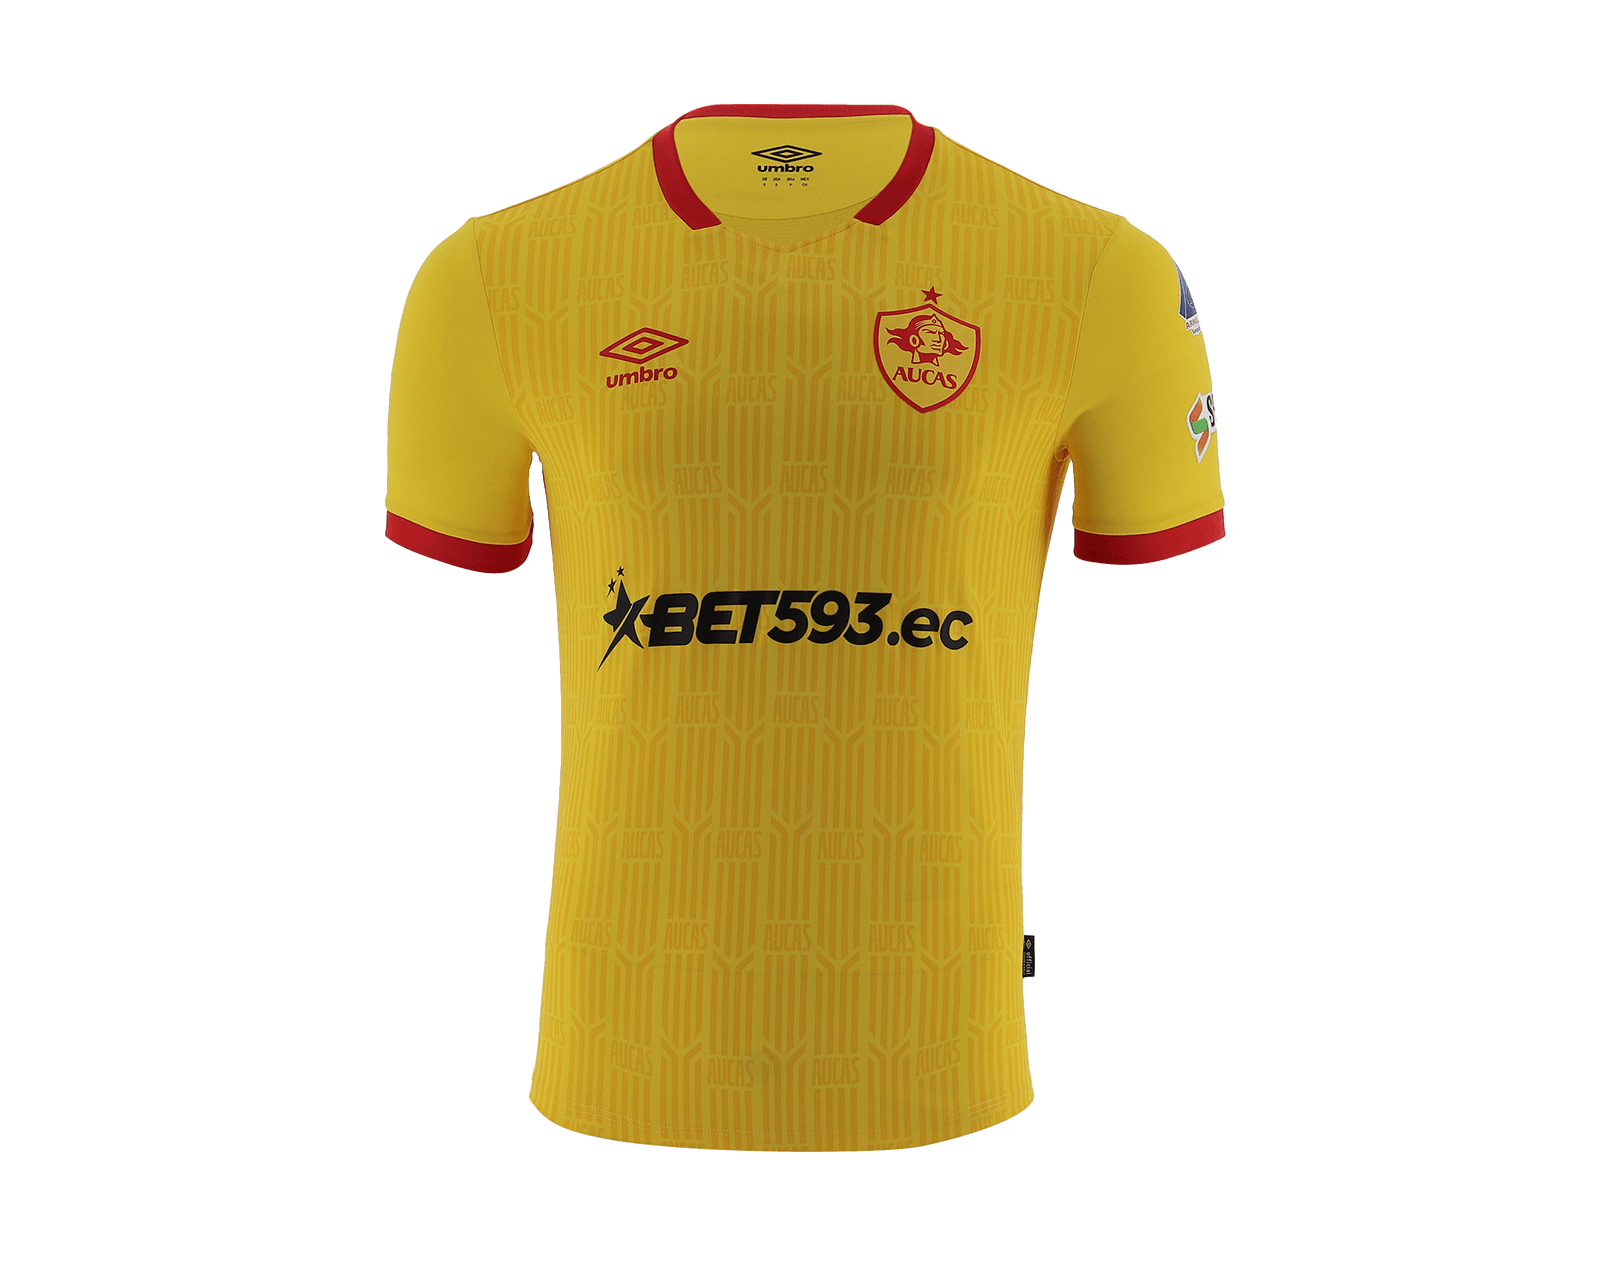 A yellow jersey with hint of red